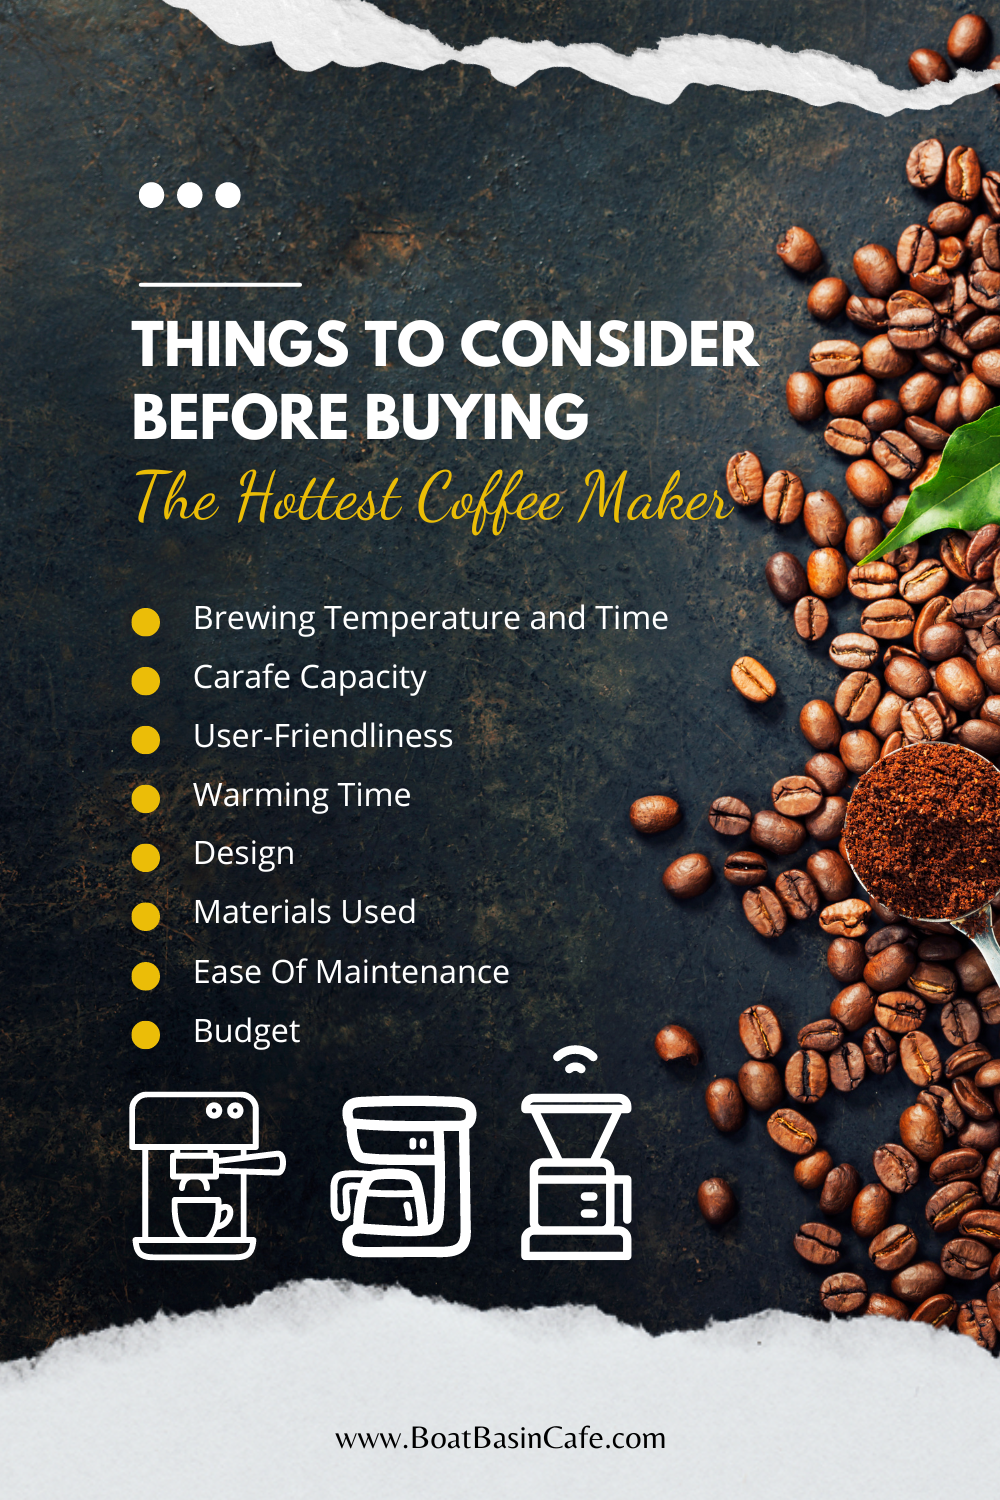 Factors To Consider Before Buying A Coffee Maker That Makes Hot Coffee